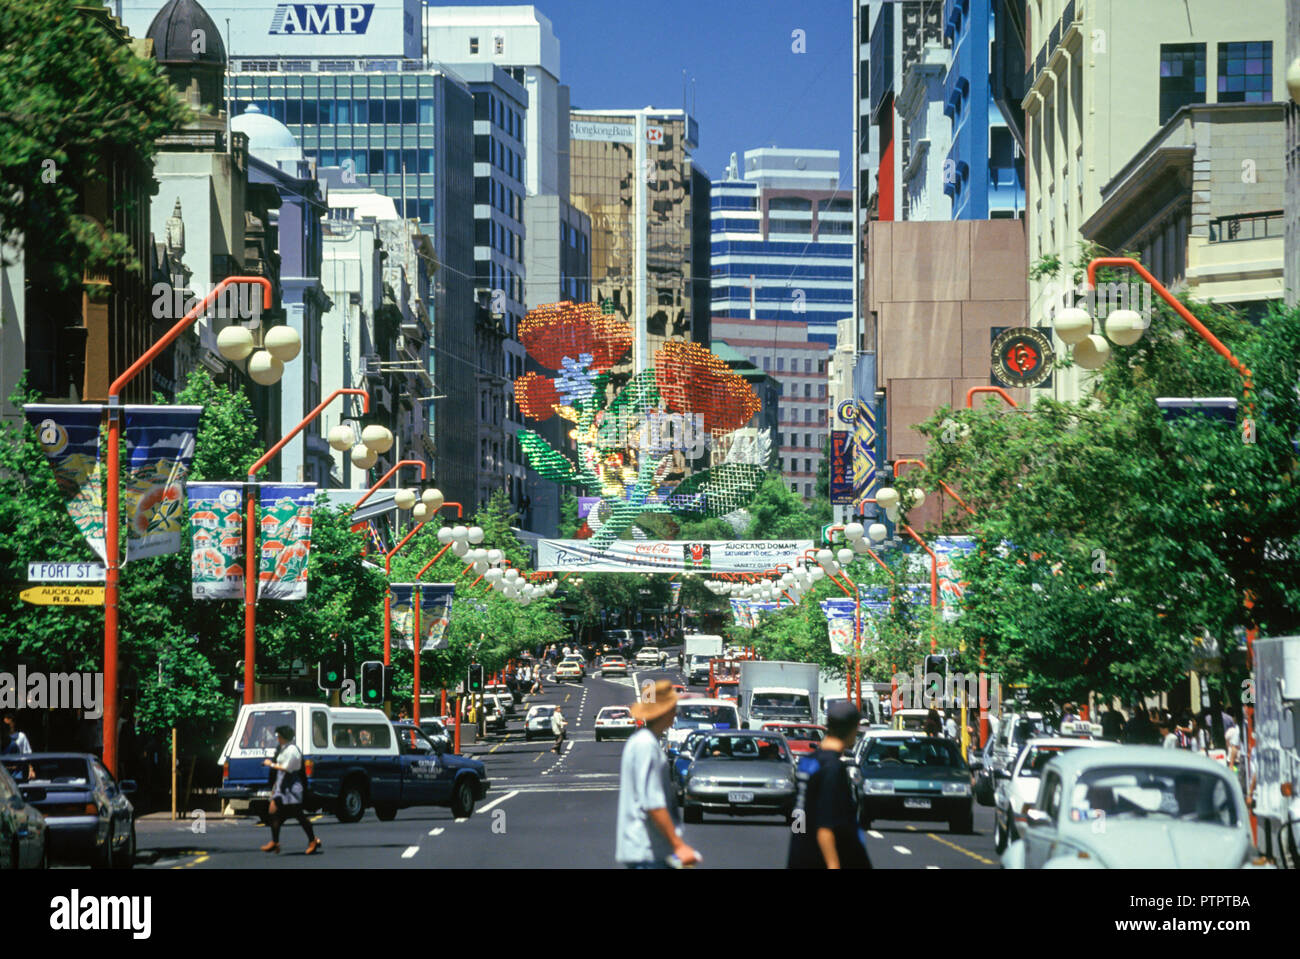 1994 HISTORICAL CHRISTMAS QUEEN STREET AUCKLAND NORTH ISLAND NEW ZEALAND Stock Photo